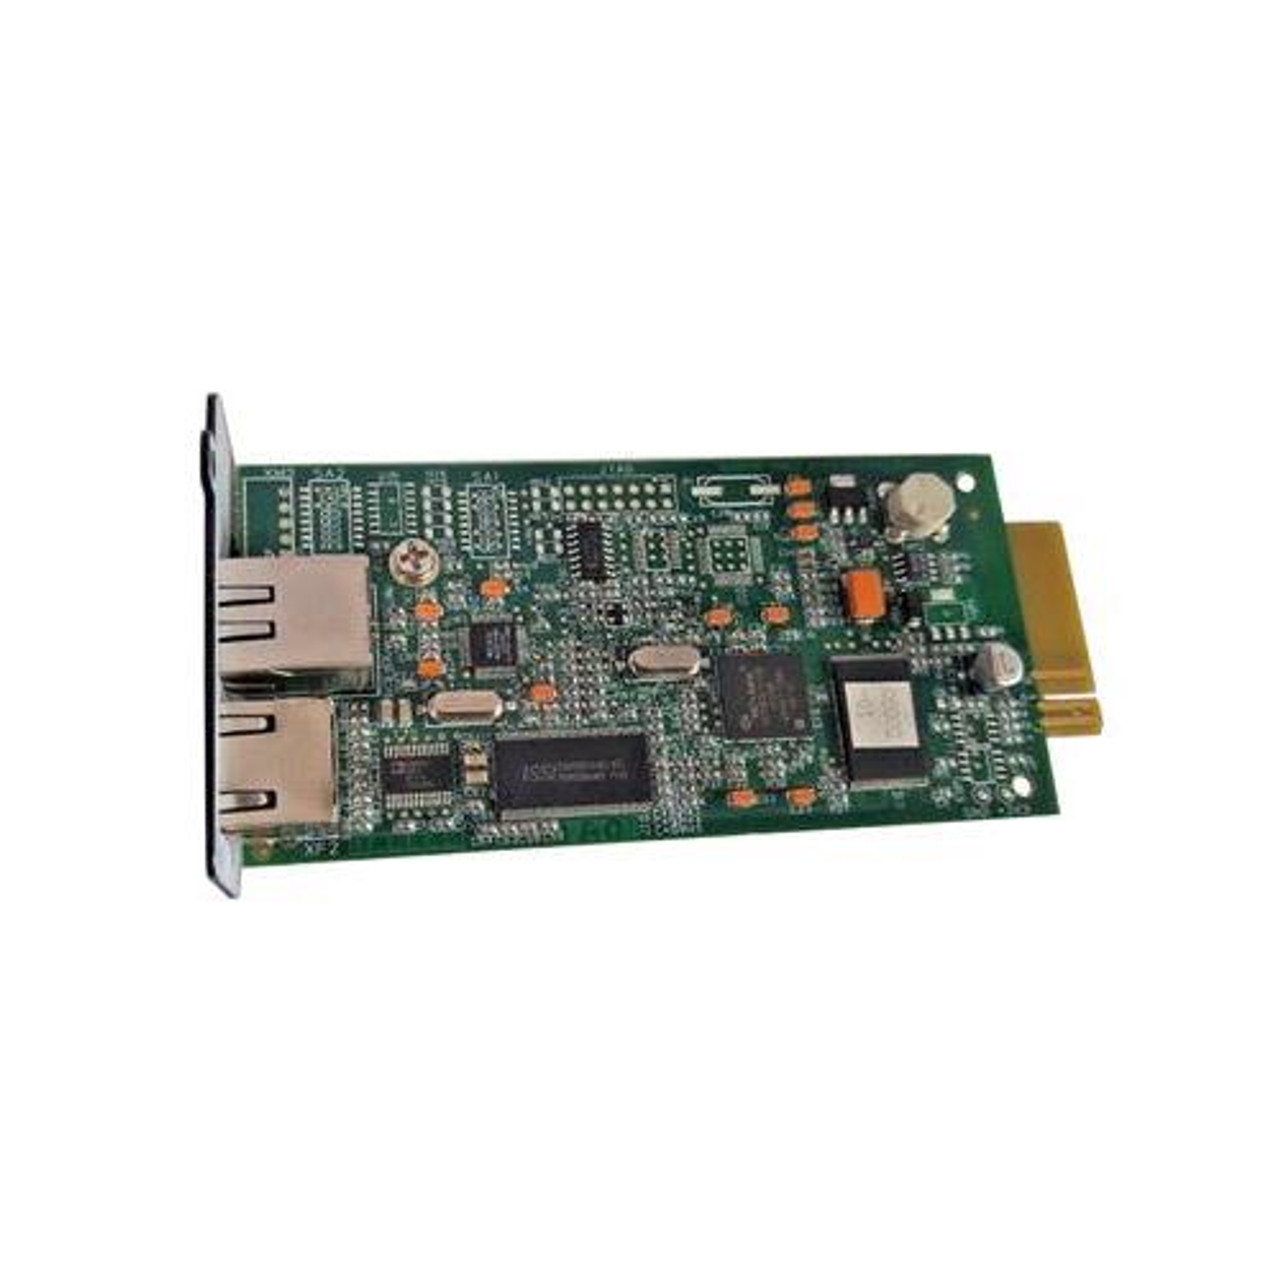 572771-B21 HP InfiniBand QDR 4X 324 Port Management Module for Mellanox InfiniScale IV IS5300 Switch Chassis